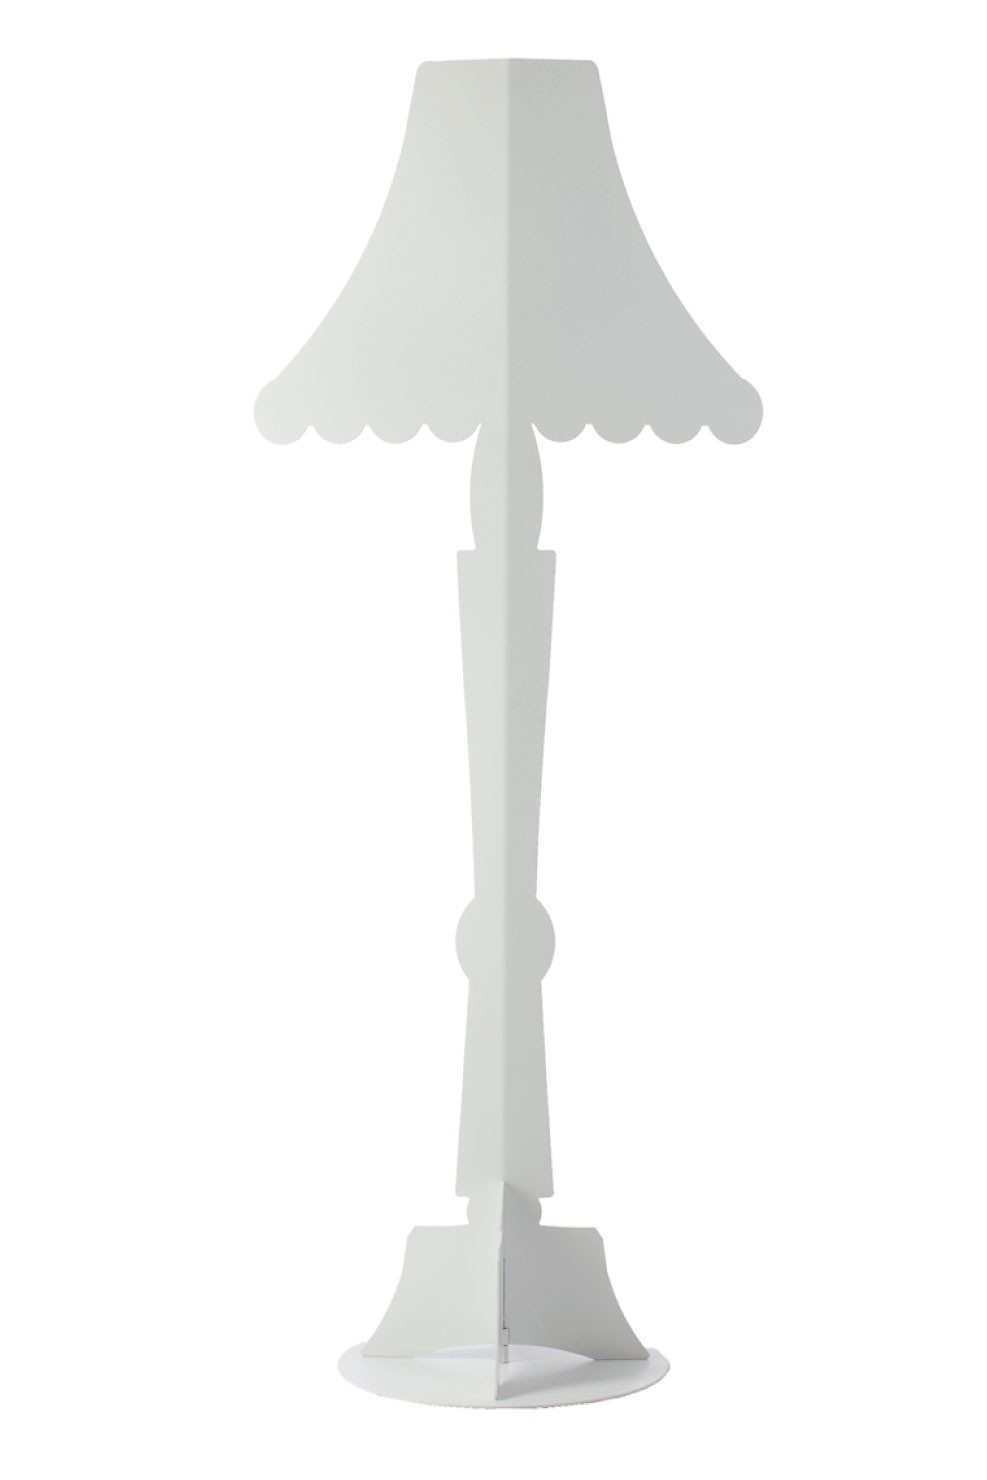 Lamps Floor Lamp Hua Classic White White Floor Led Lamps inside dimensions 987 X 1480